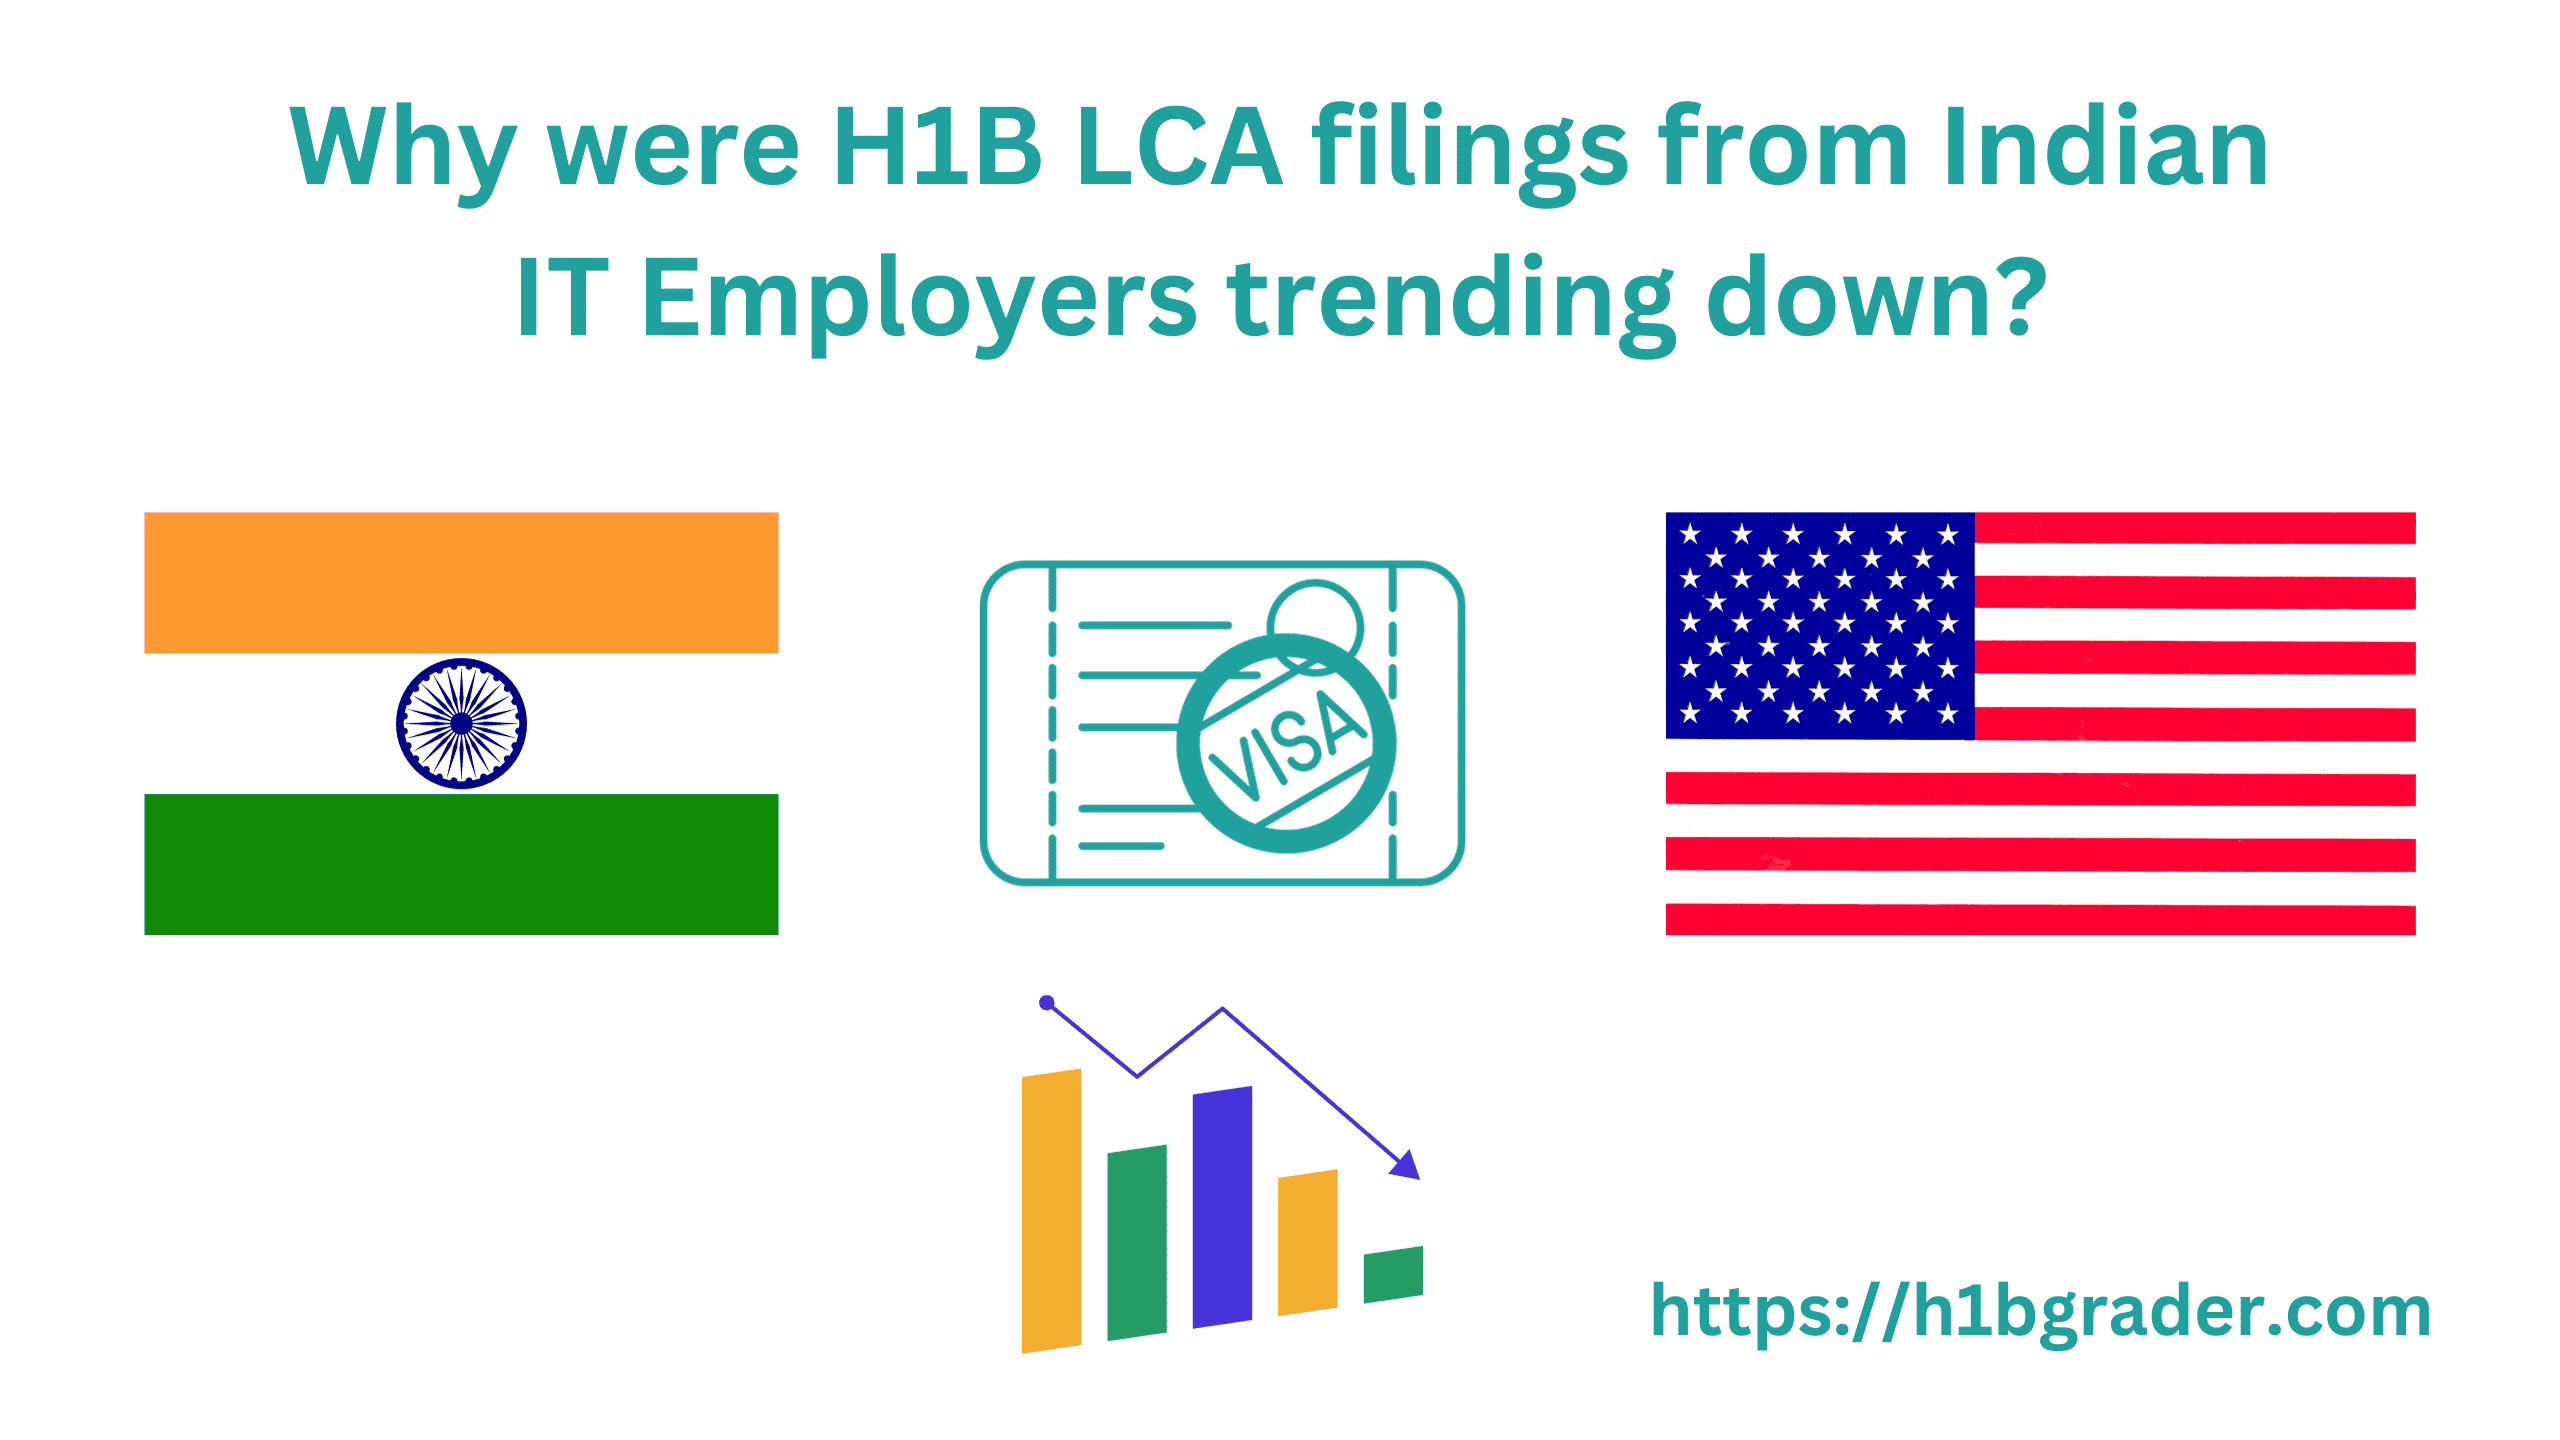 Why were H1B LCA filings from Indian IT Employers trending down?